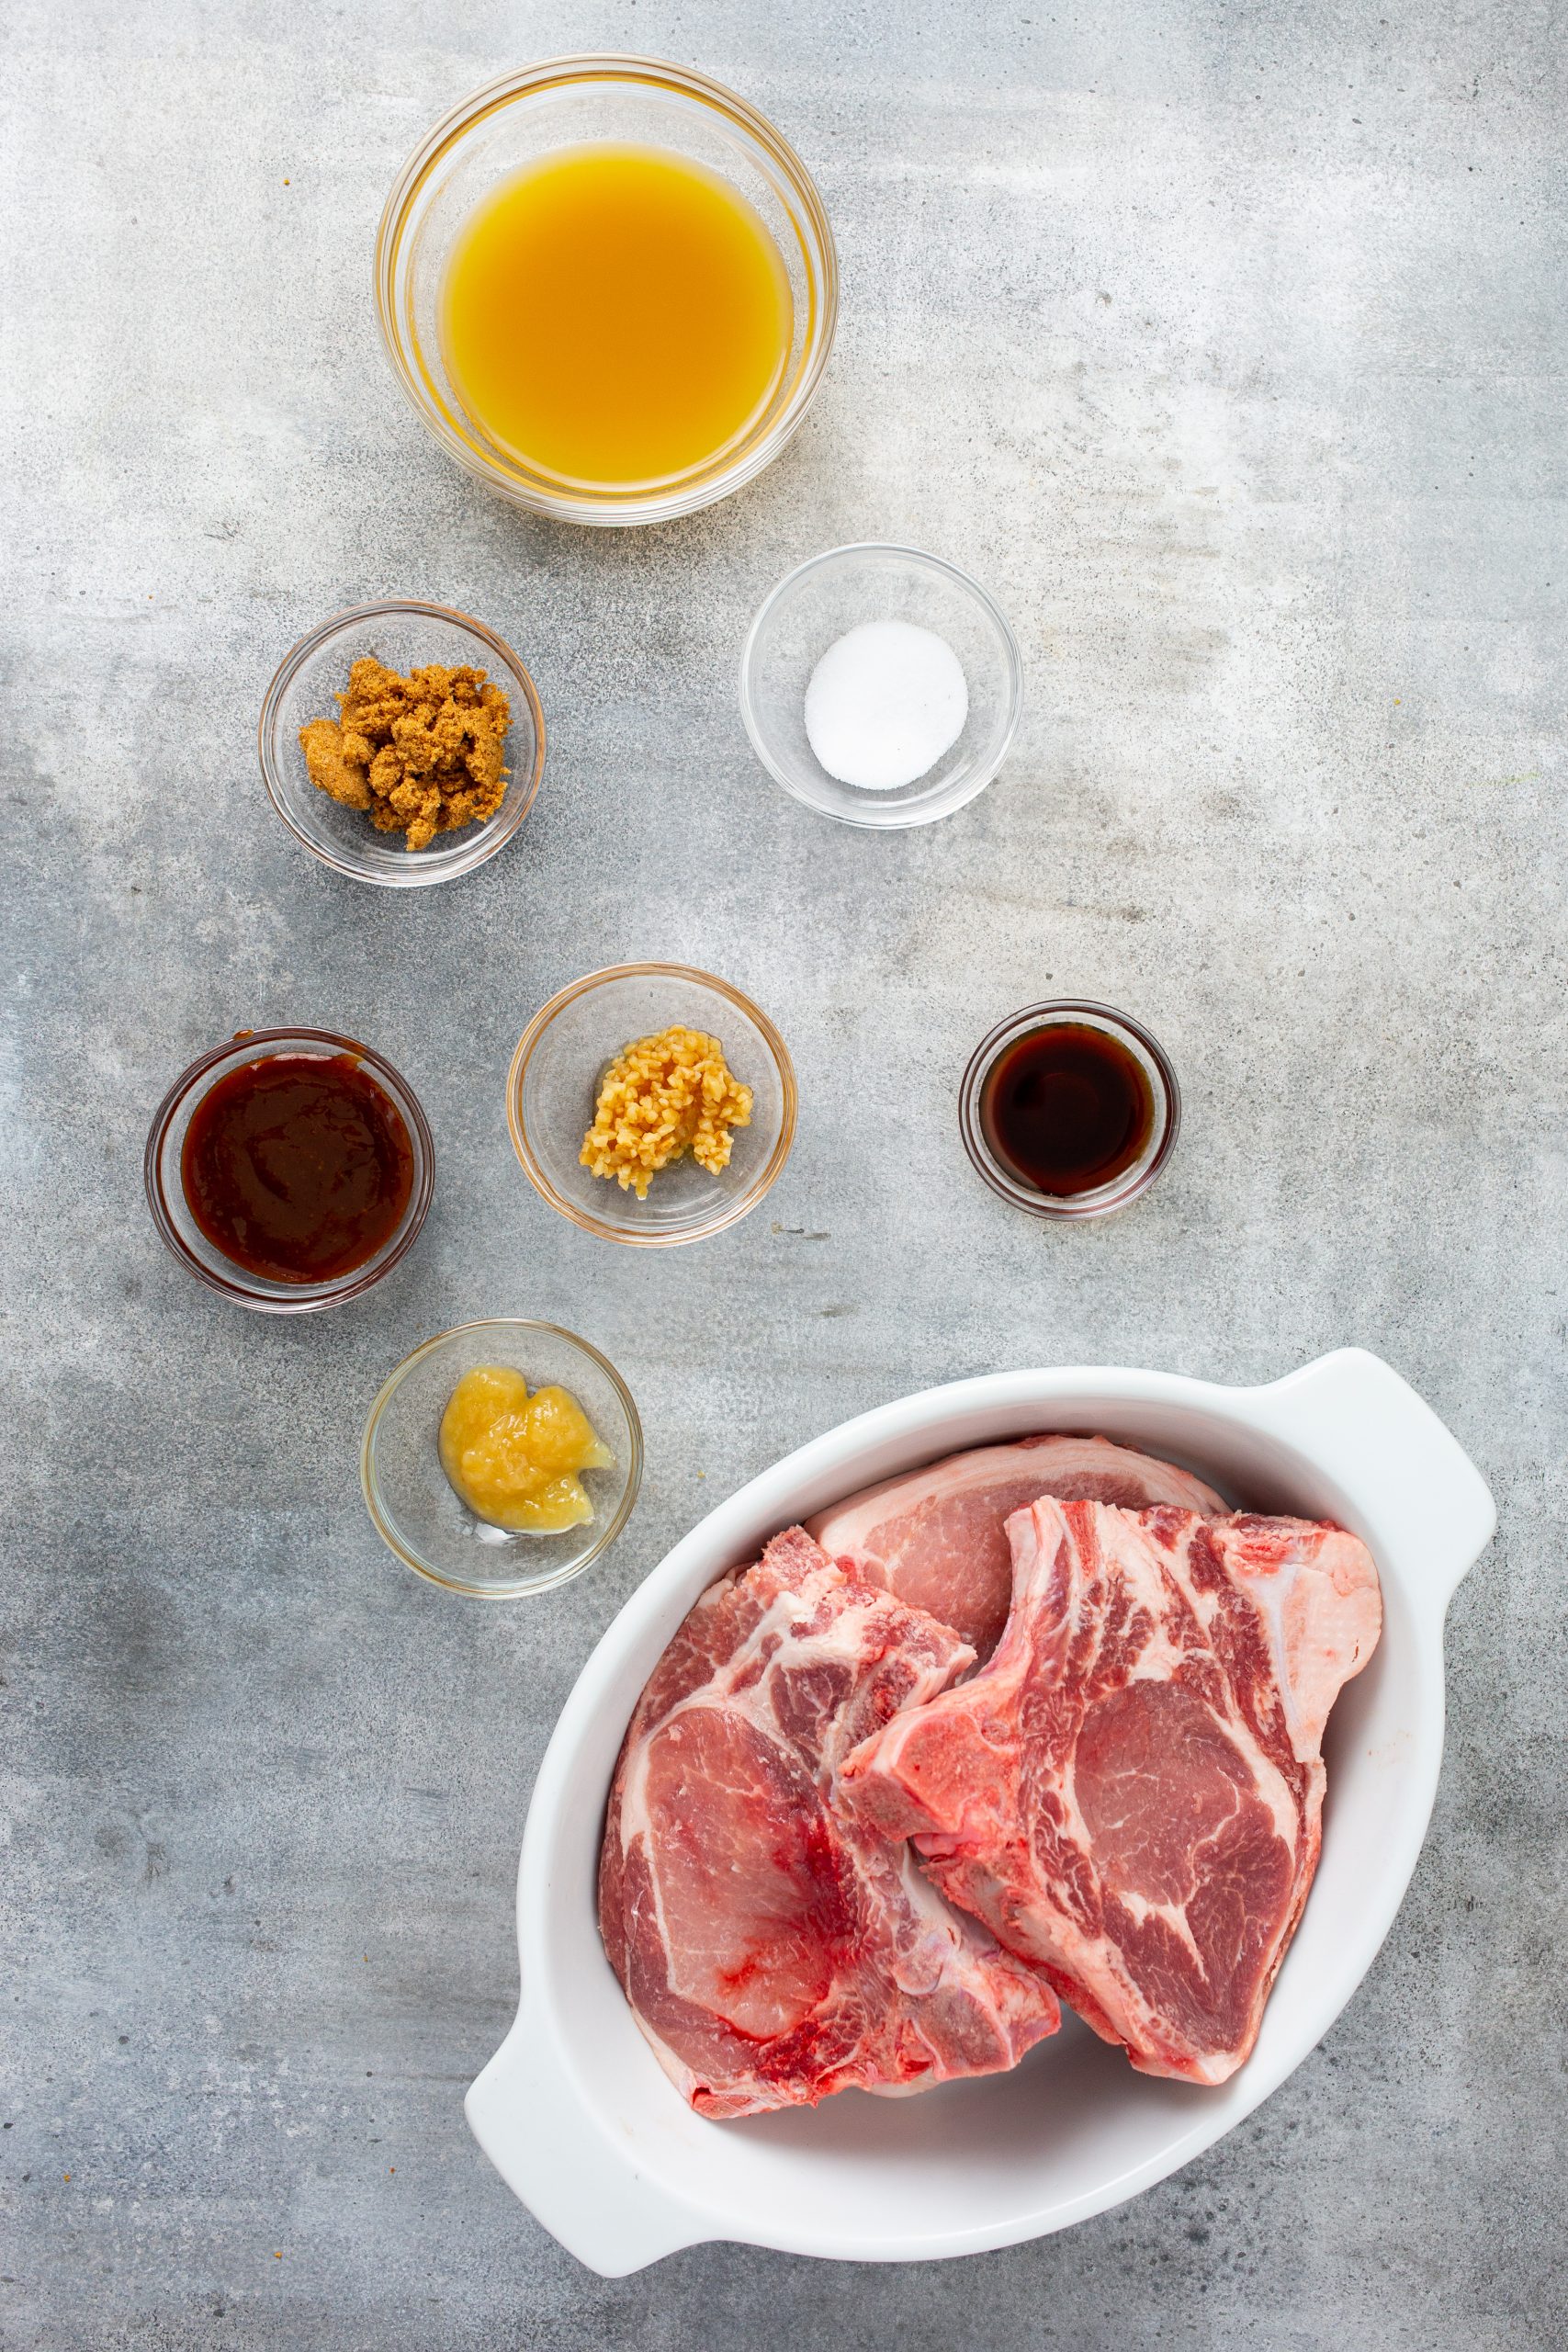 A white dish with raw pork chops, surrounded by bowls containing various ingredients: broth, brown sugar, salt, minced garlic, sauce, and mustard, arranged on a gray countertop.